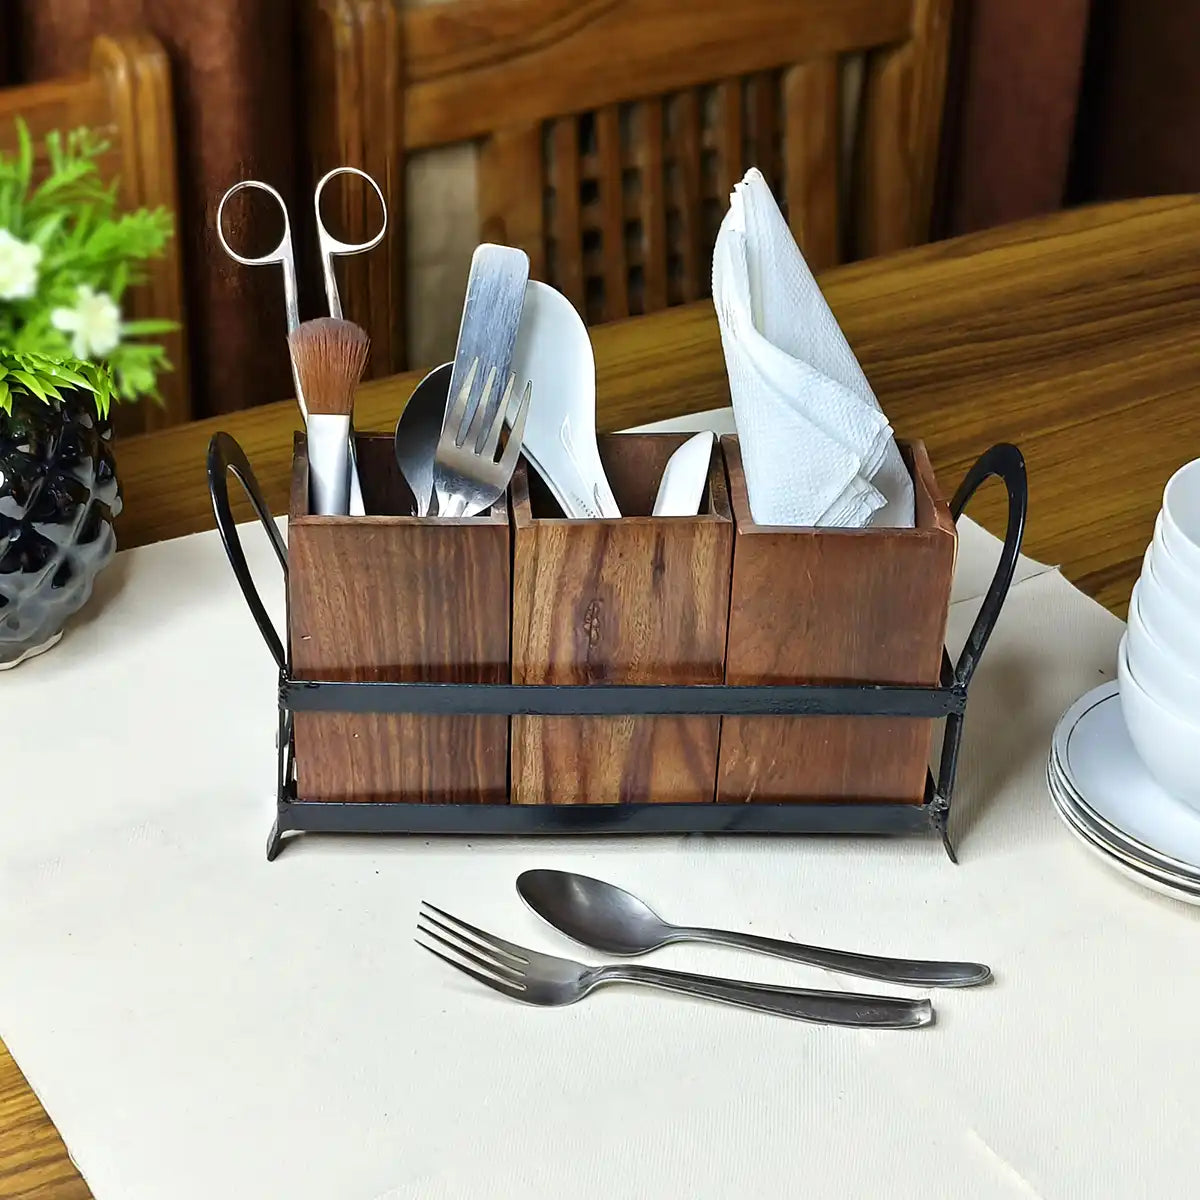 Wooden Cutlery Holder for Dining Table with 3 Wooden Jars and Iron Stand